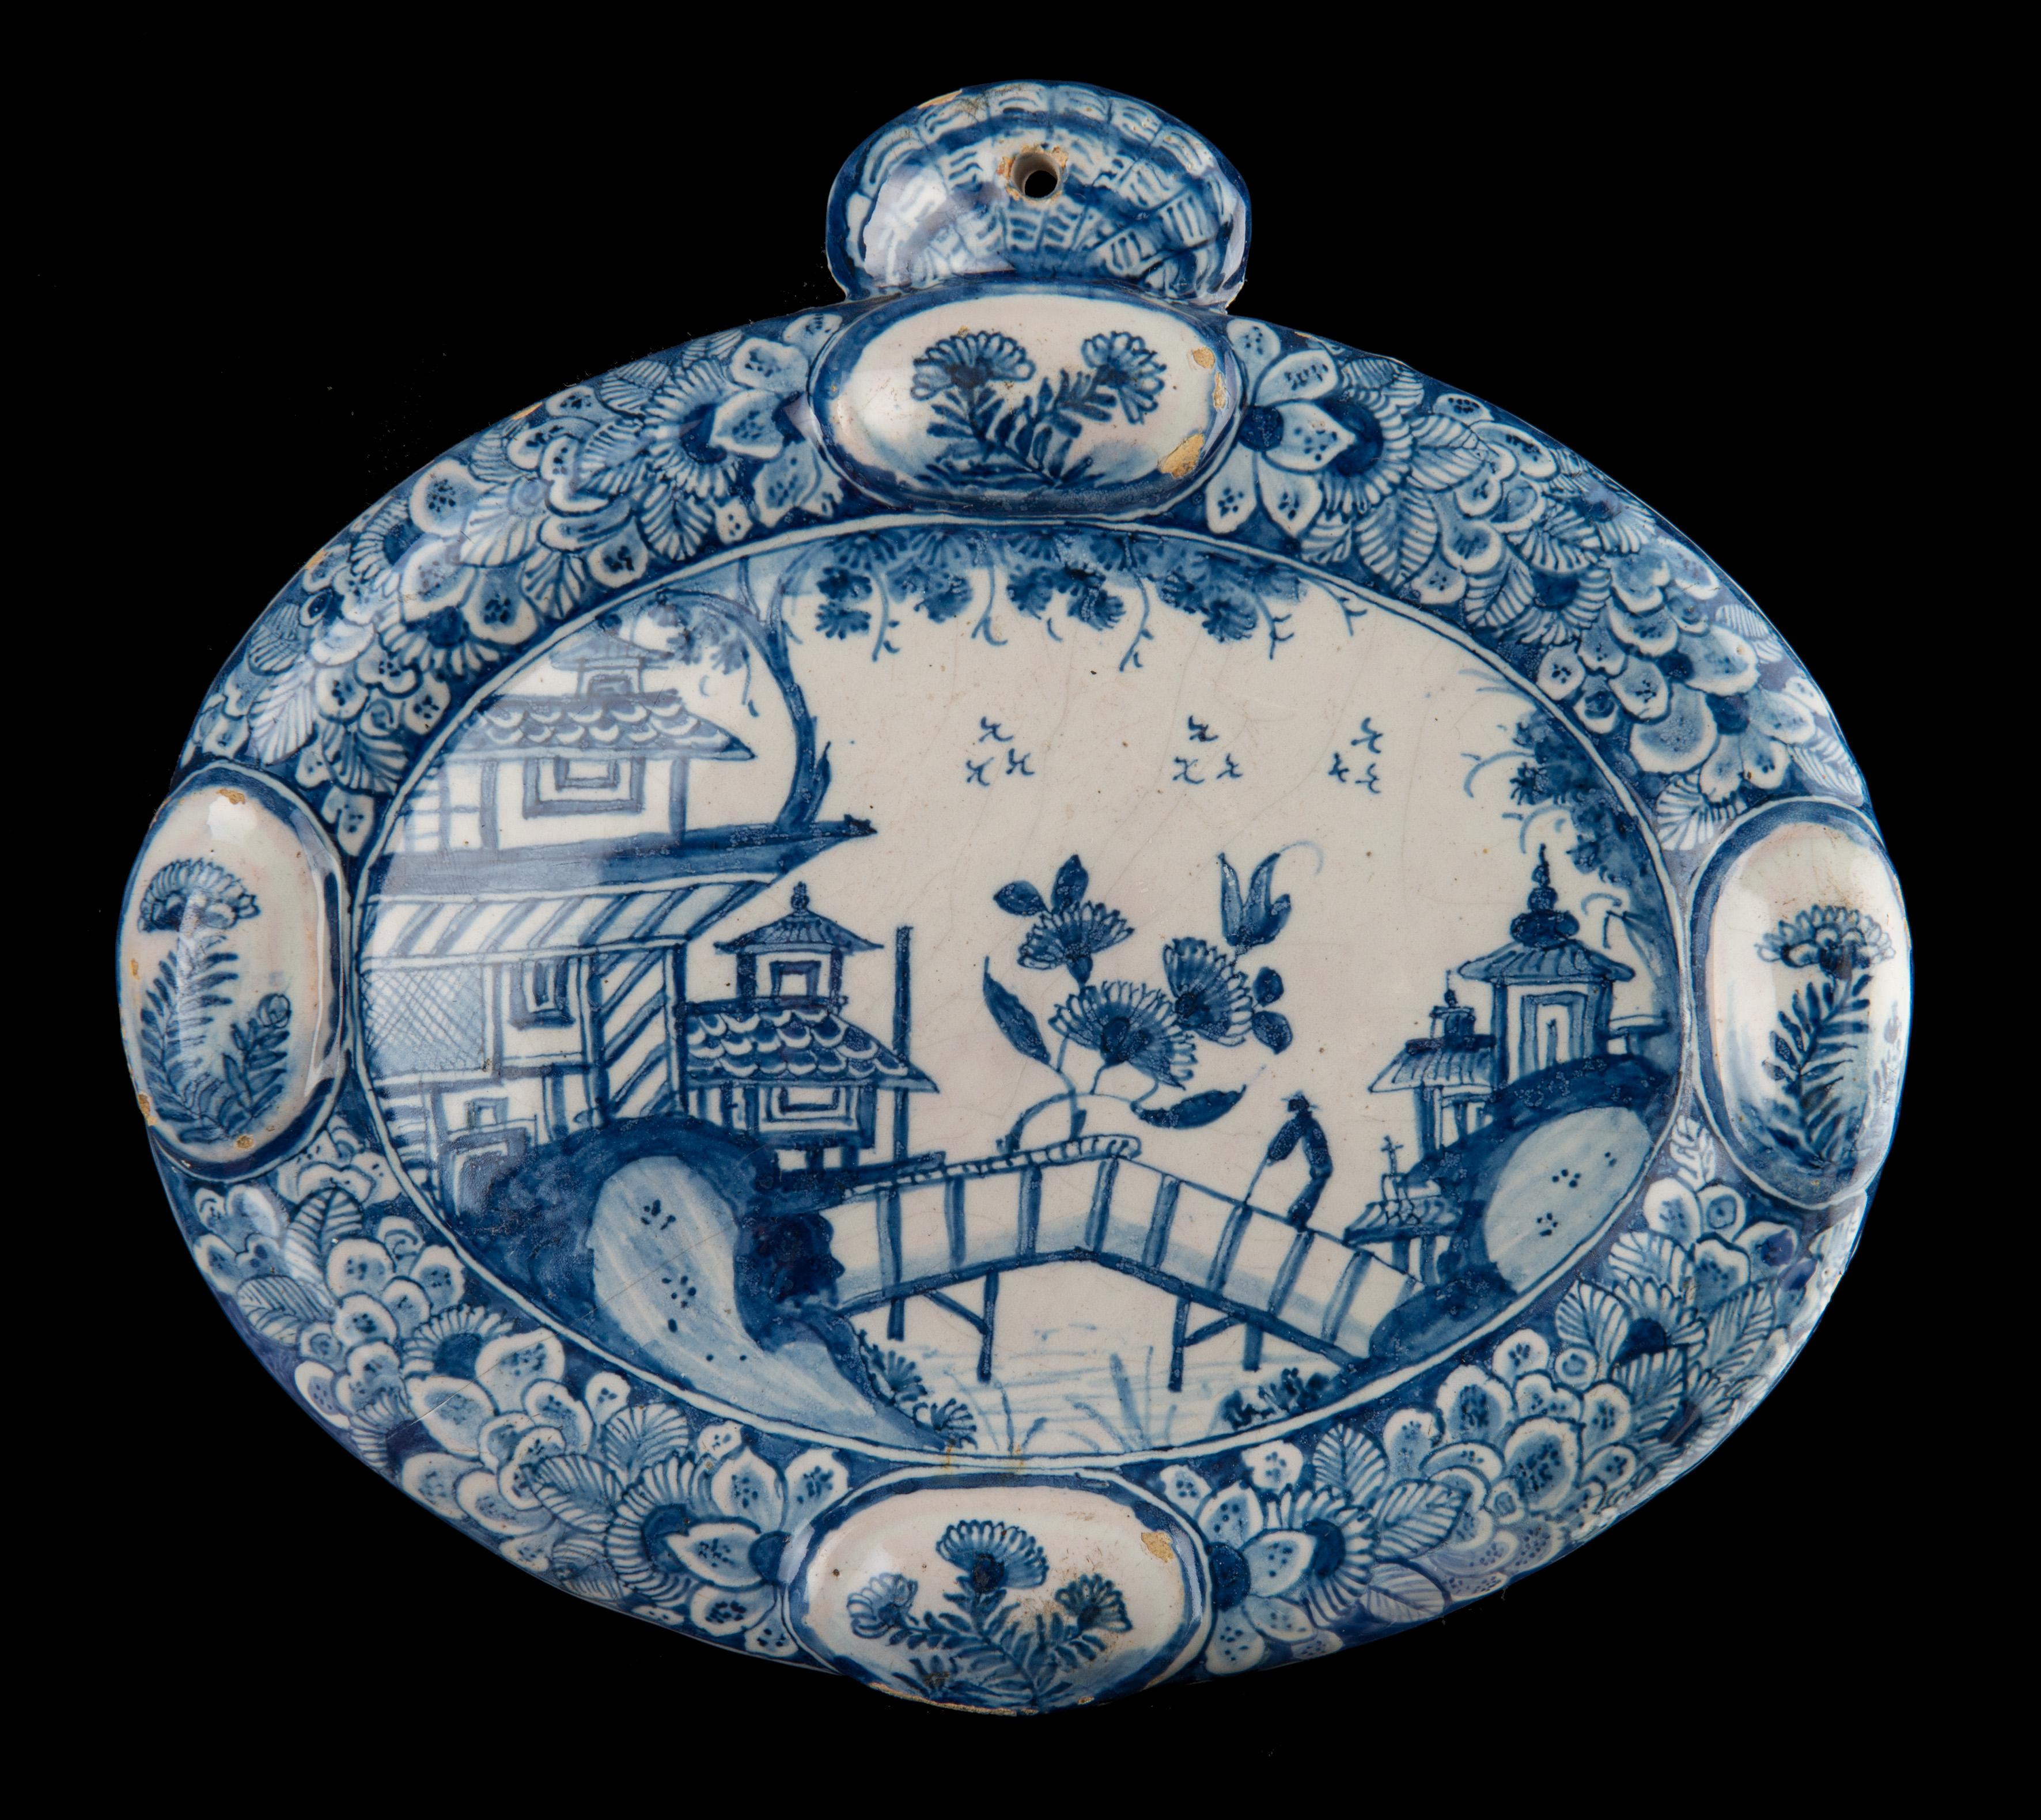 Blue and white chinoiserie plaque. Delft, 1740-1760.

The oval blue and white plaque has a molded rim with four raised, oval cartouches. At the top a shell-shaped suspension loophole is molded. The plaque is painted with a chinoiserie water